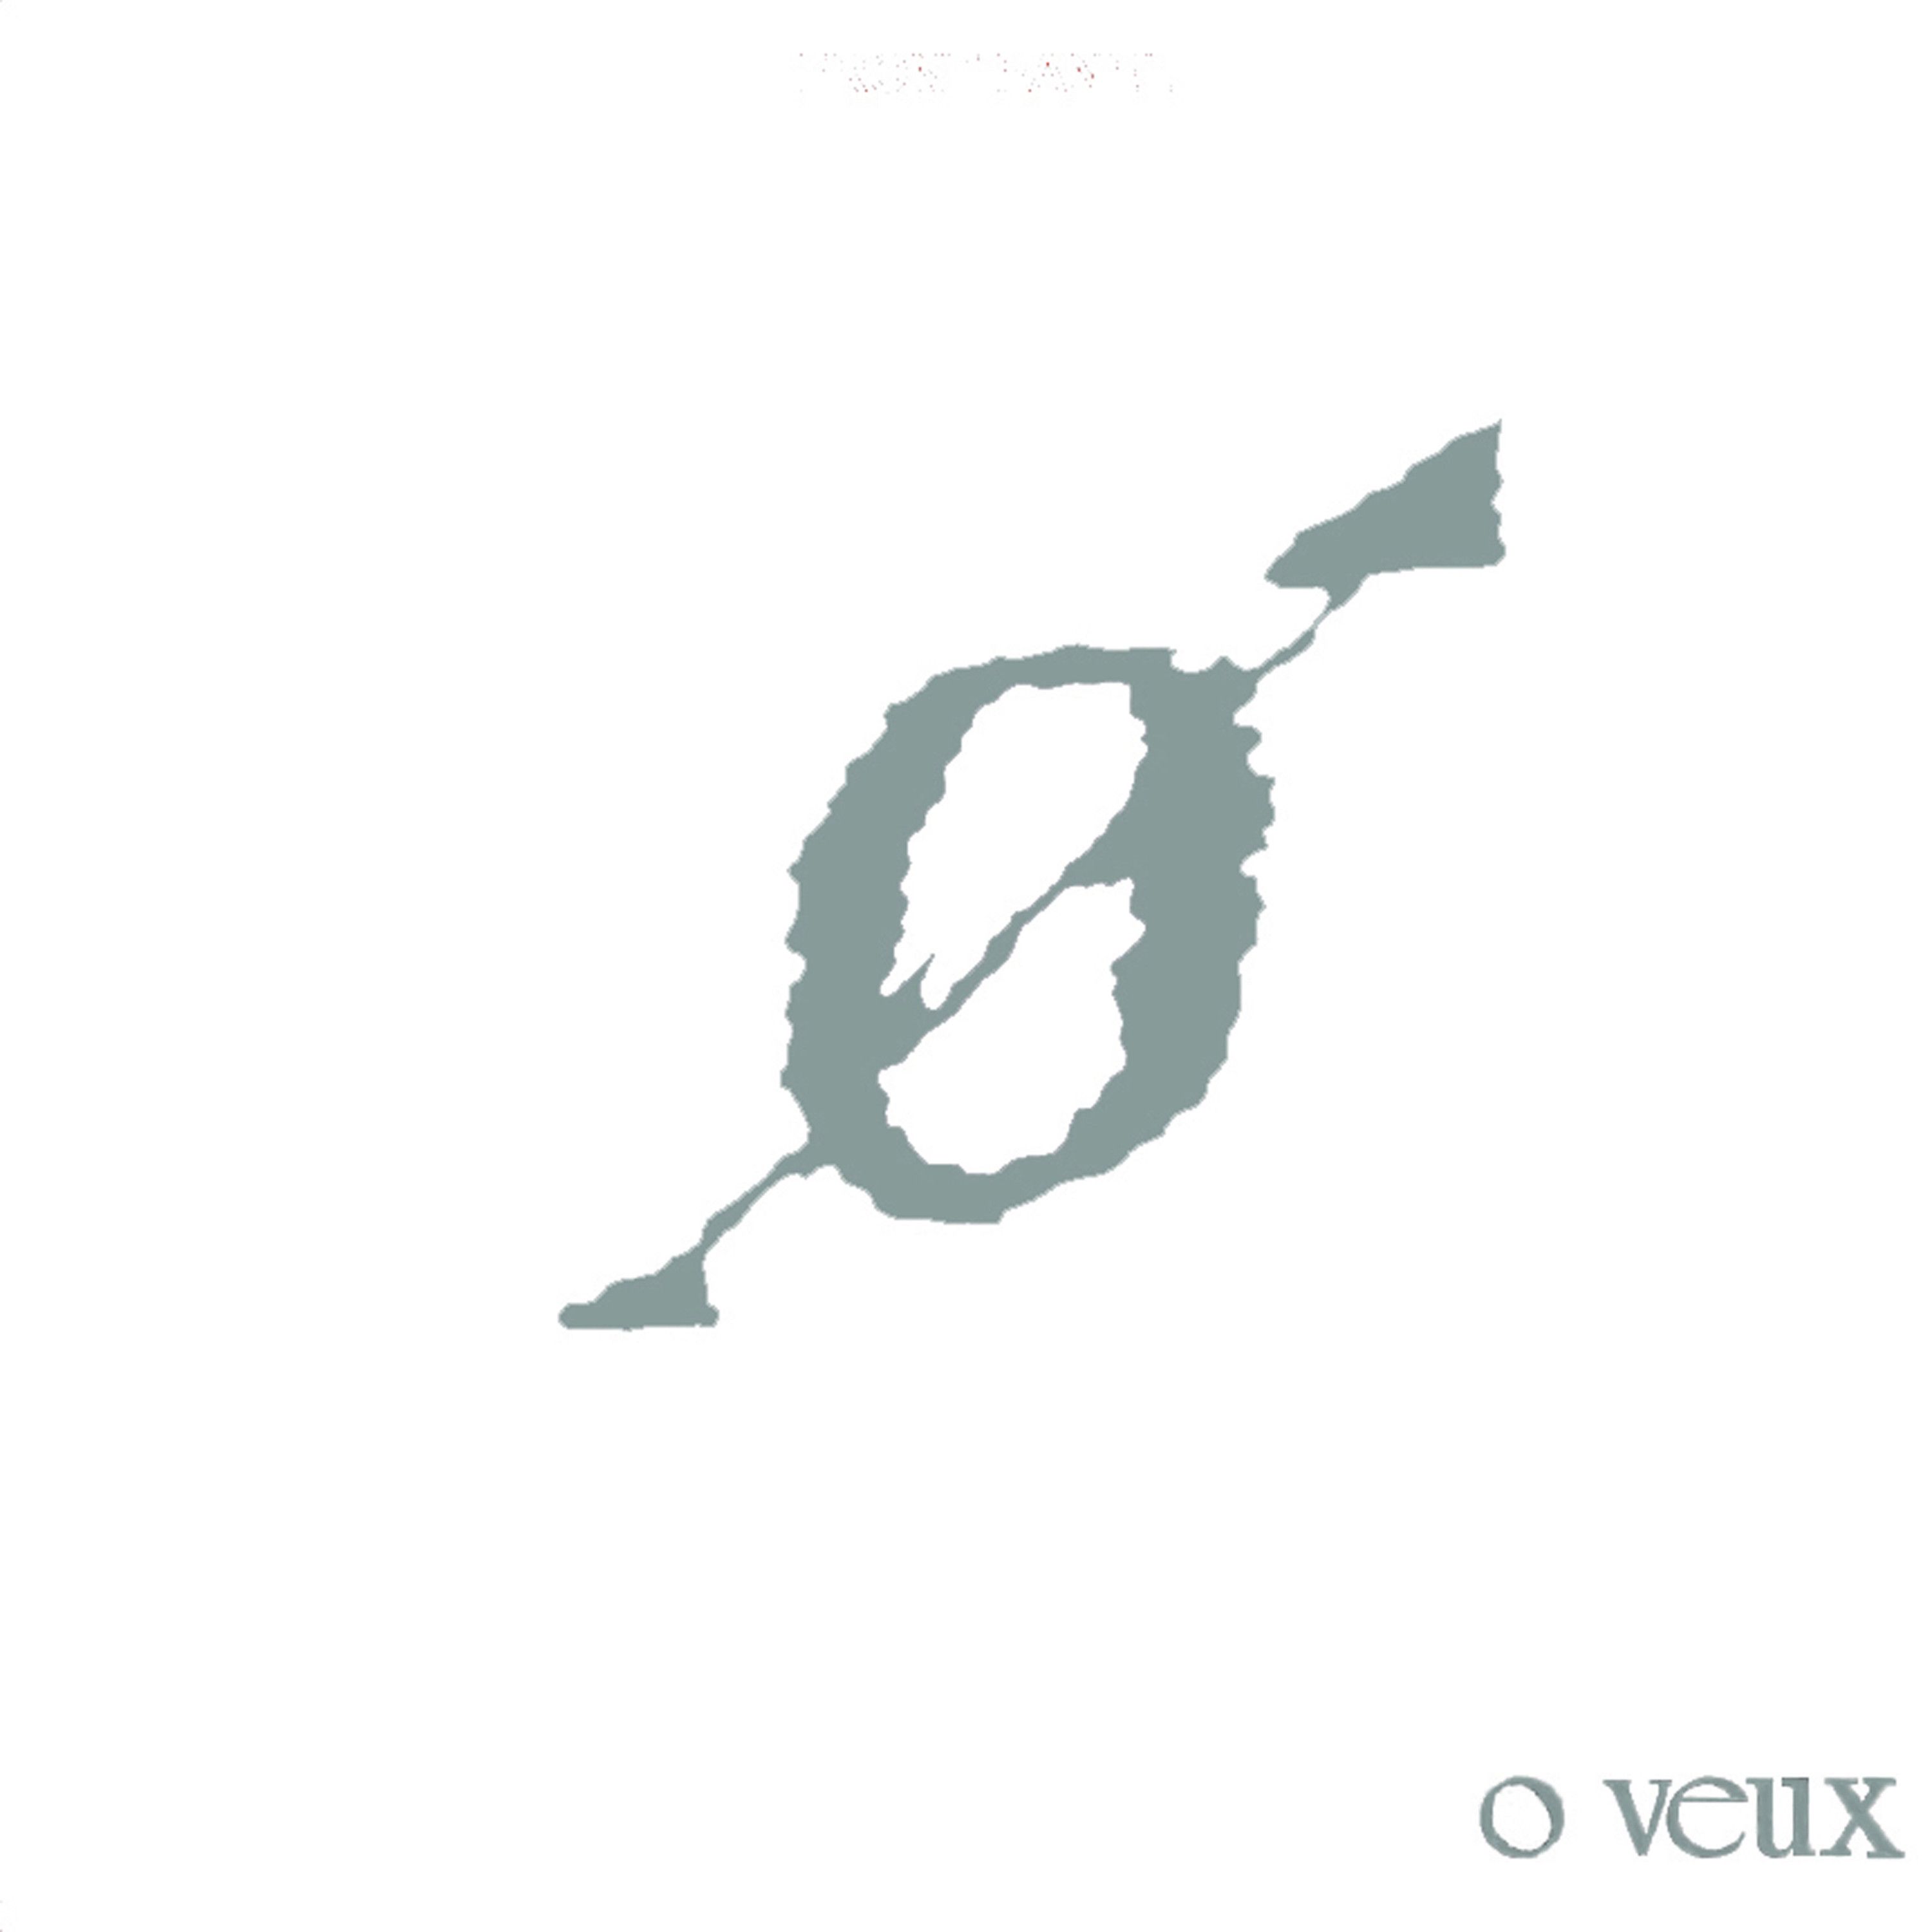 O Veux - White Album - Early Years (1981-1983) front cover